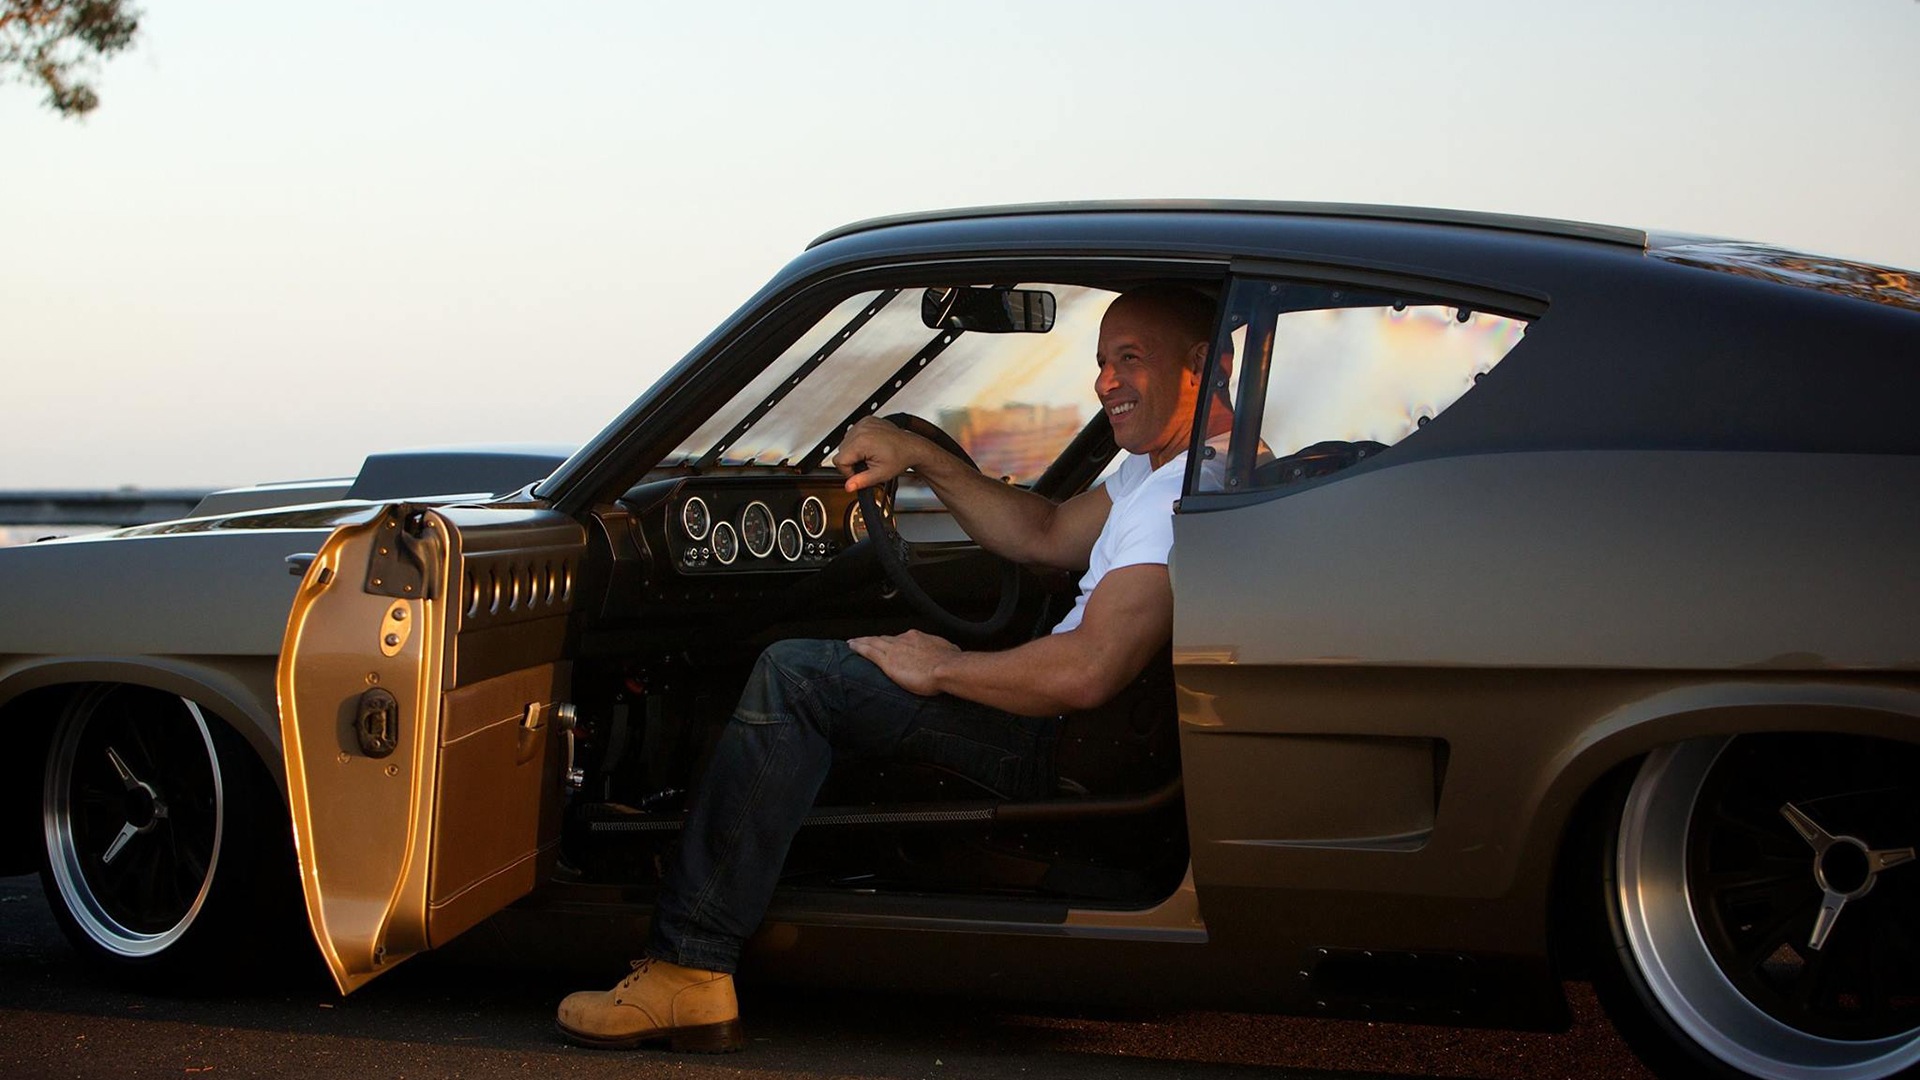 Fast and Furious 7 HD movie wallpapers #13 - 1920x1080